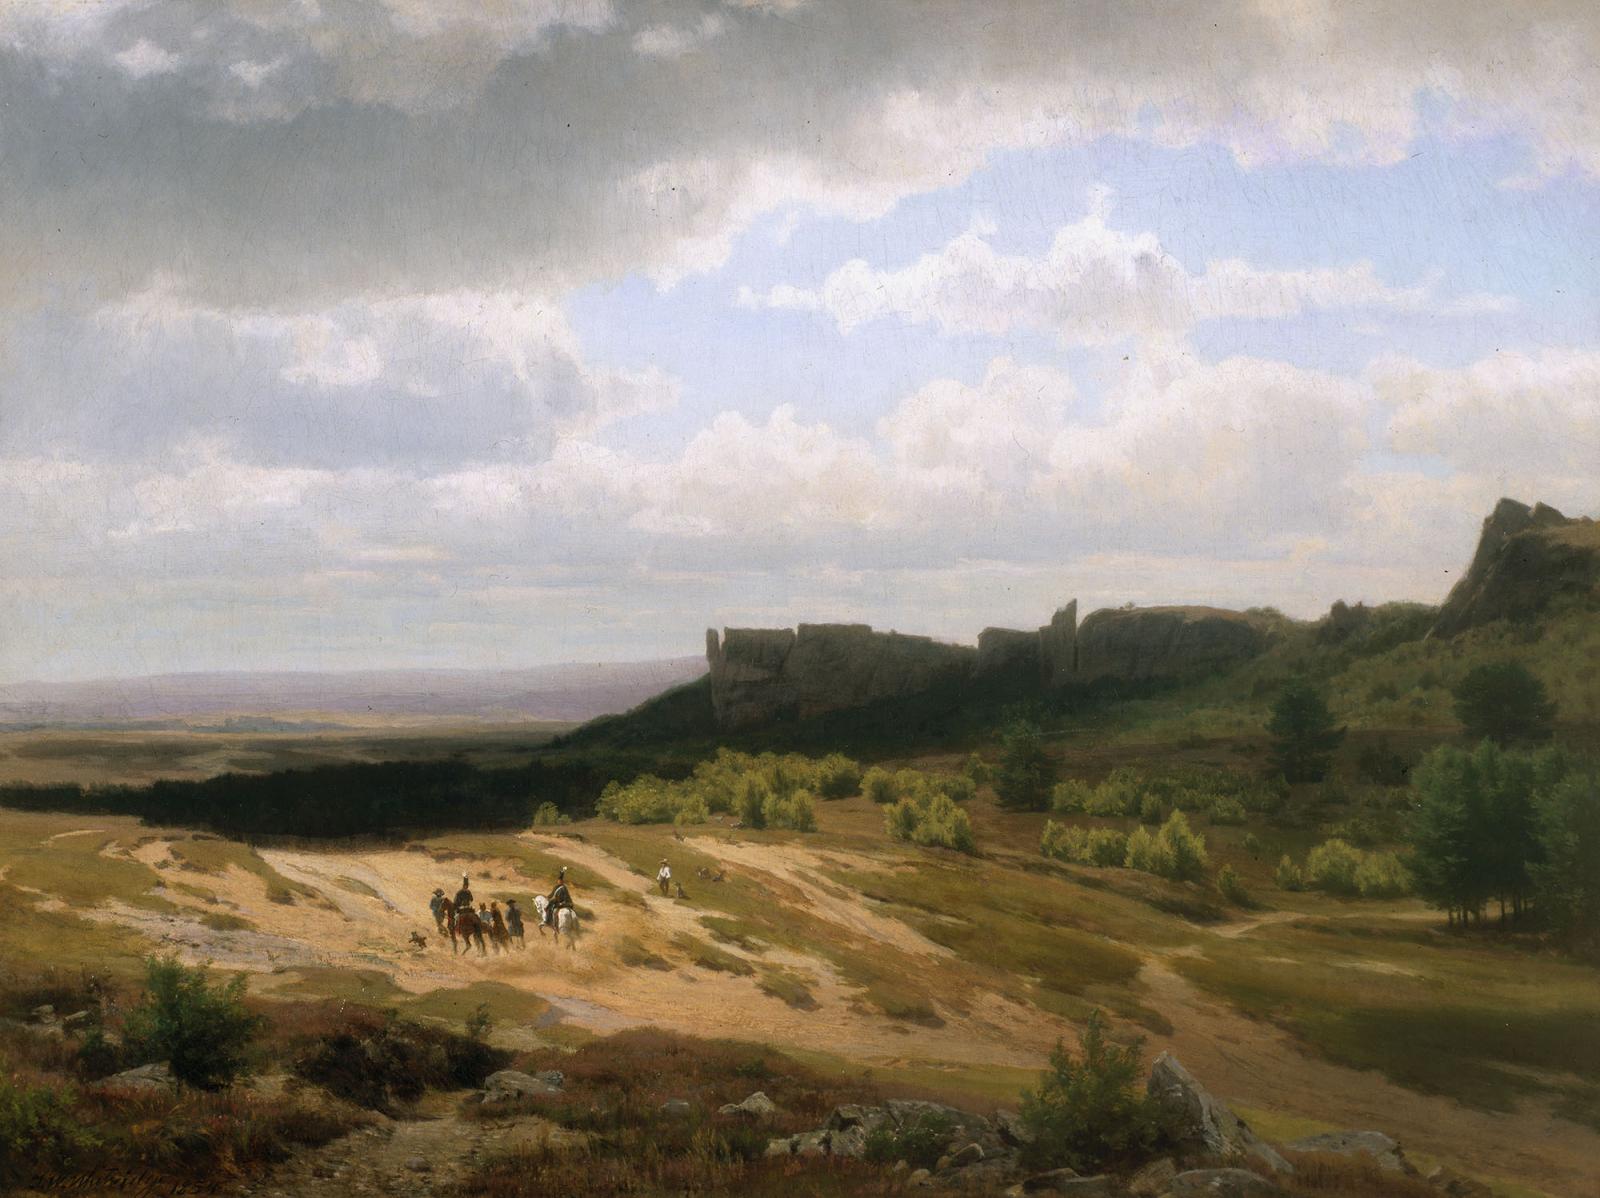 From the Harz Mountains (Riders in the Harz Mountains) by Worthington Whittredge